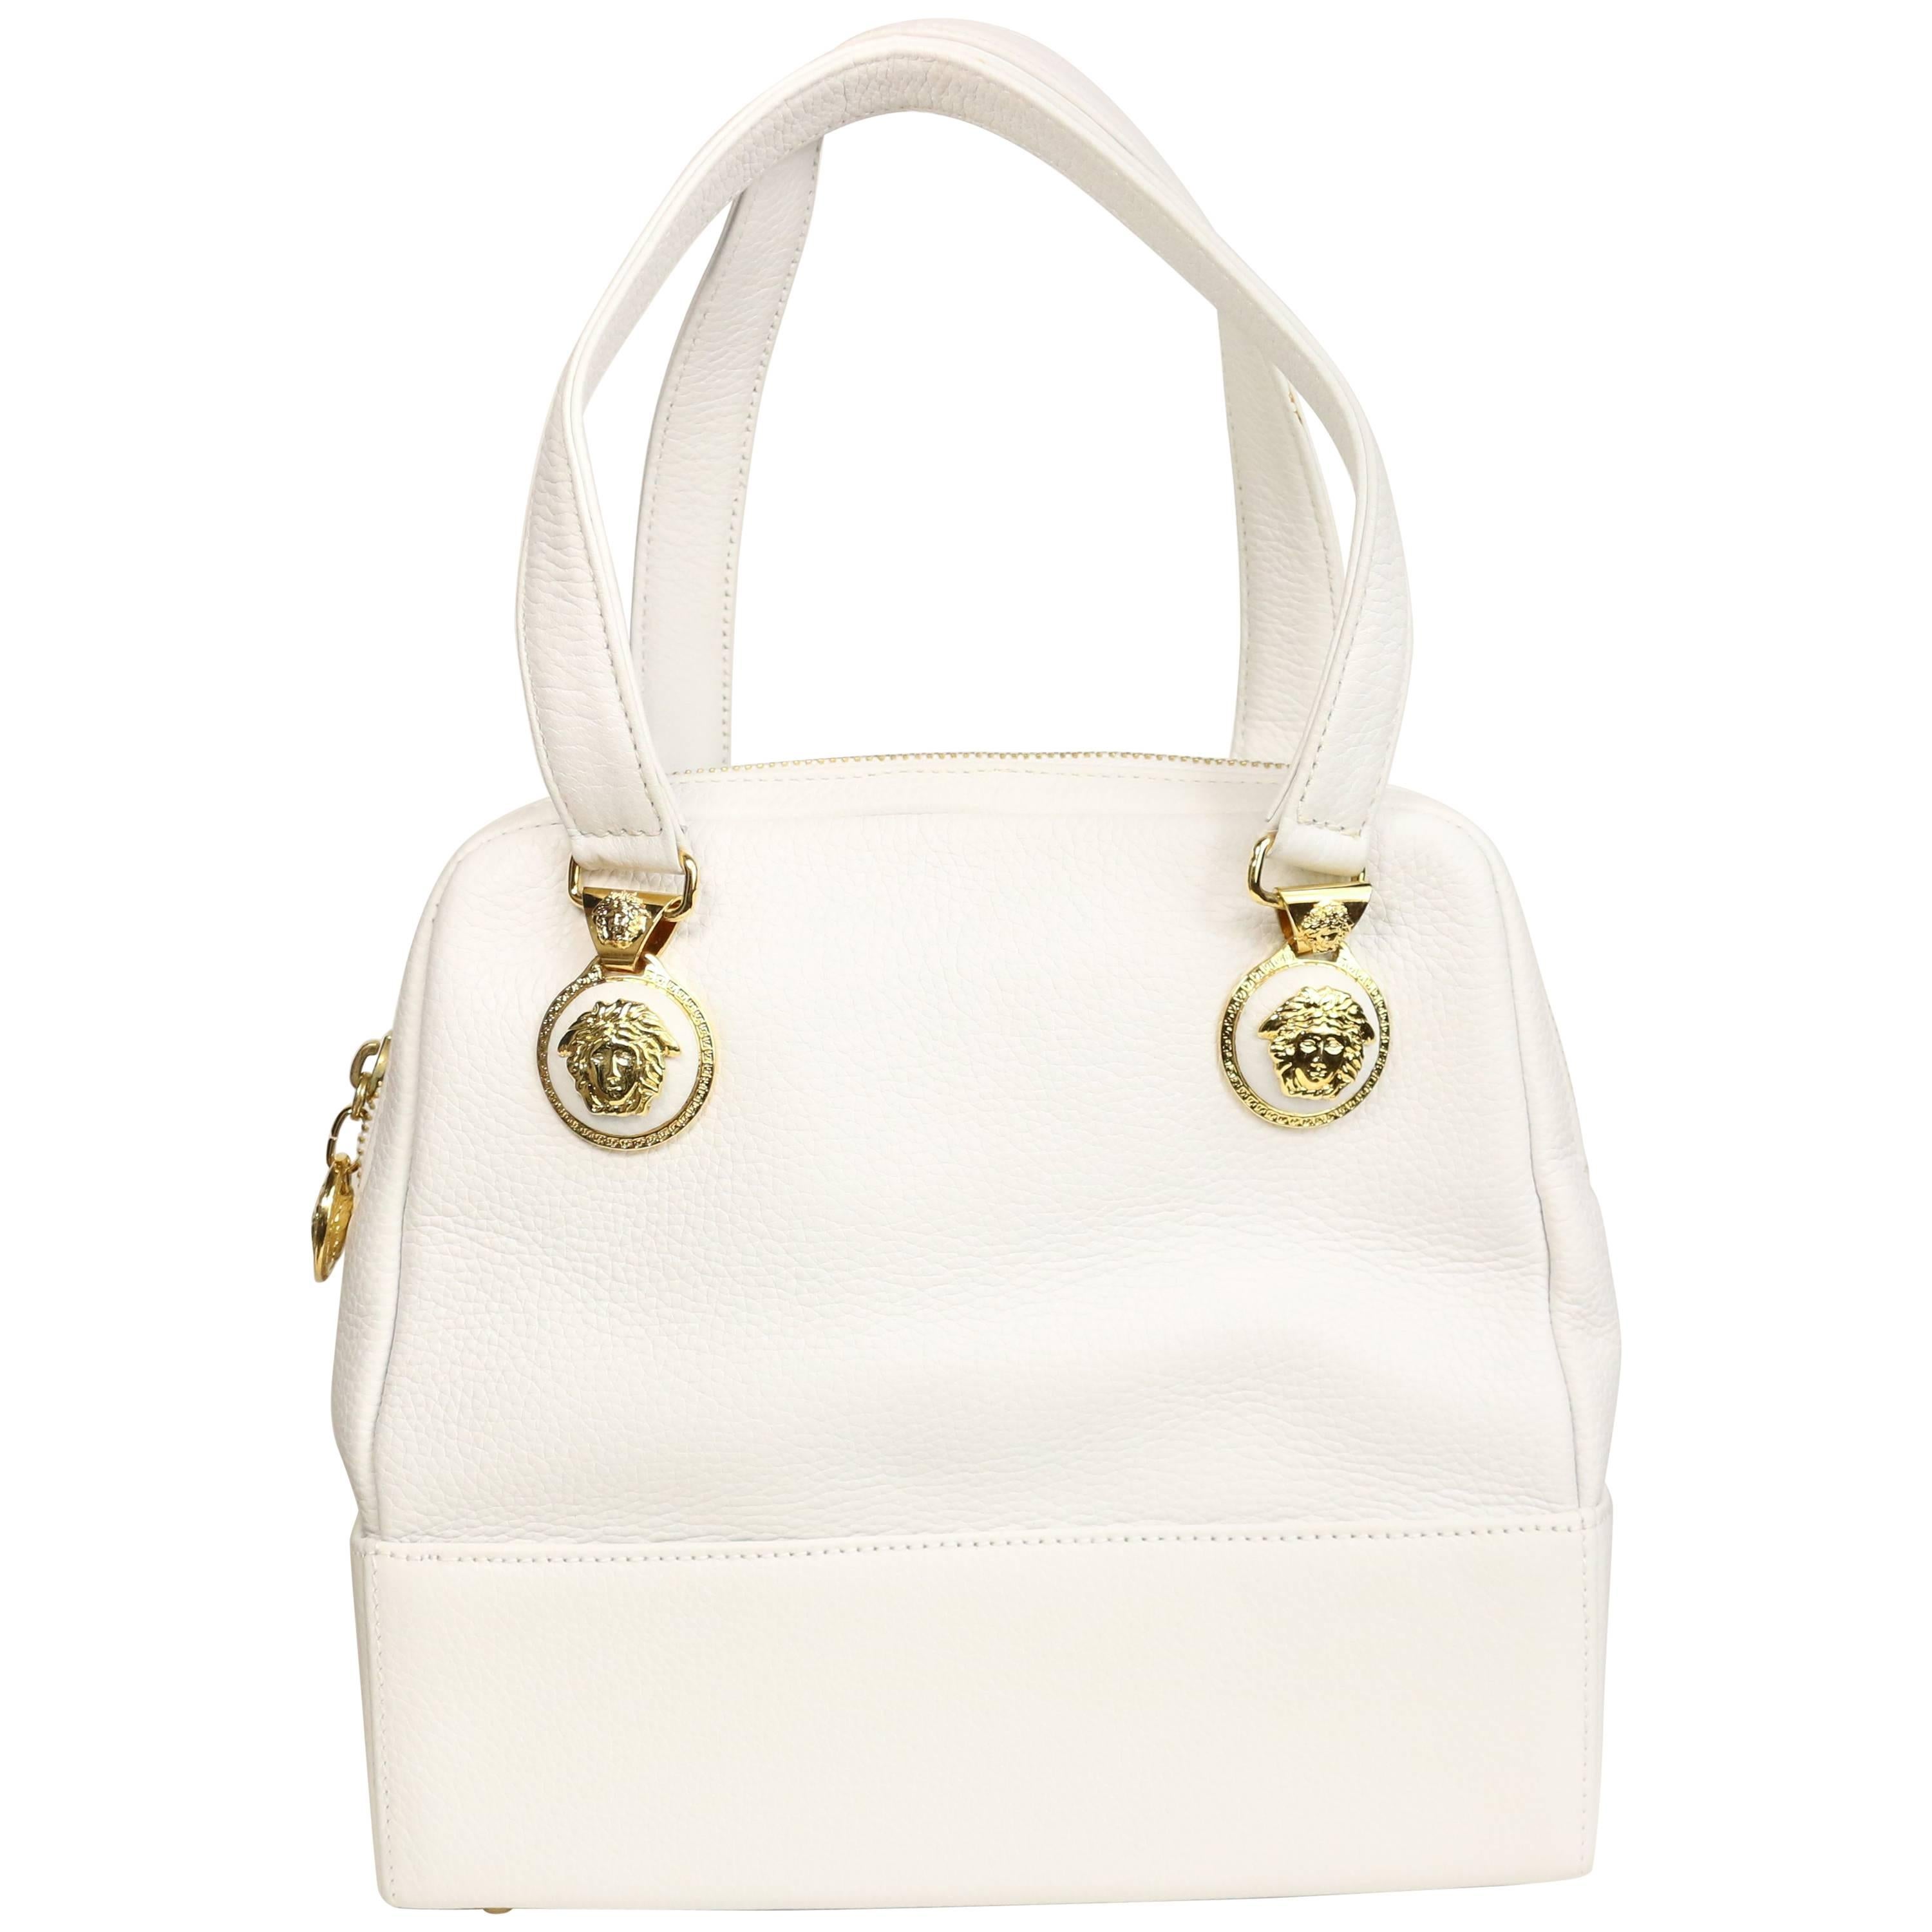 90s Gianni Versace Couture White Leather  Handbag